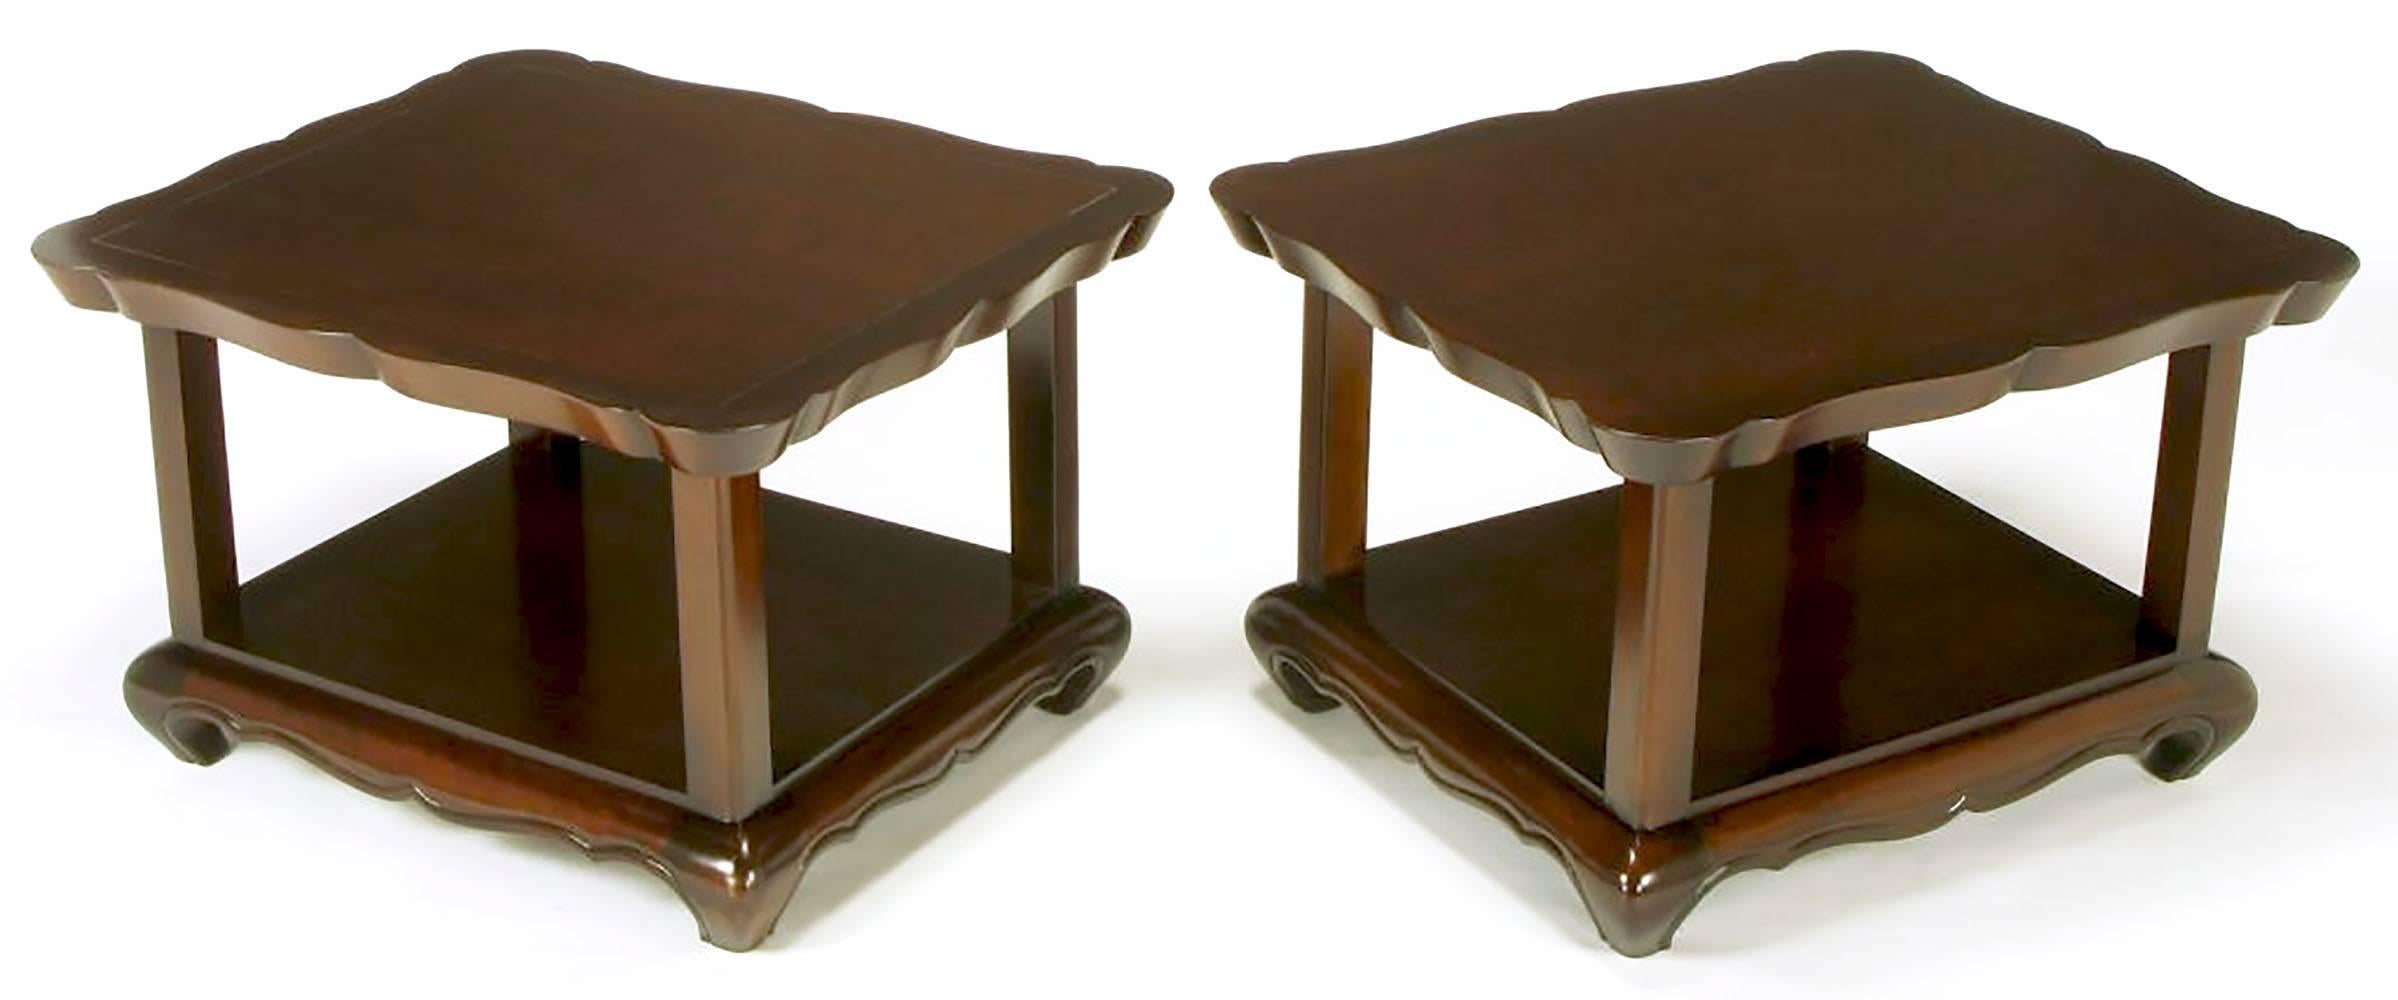 Asian inspired two-tiered side tables with scalloped edge, incised border top. Squared column supports and raised bottom surface. Scalloped and beaded apron with exaggerated returned legs. Completely restored, exceptional build quality, walnut